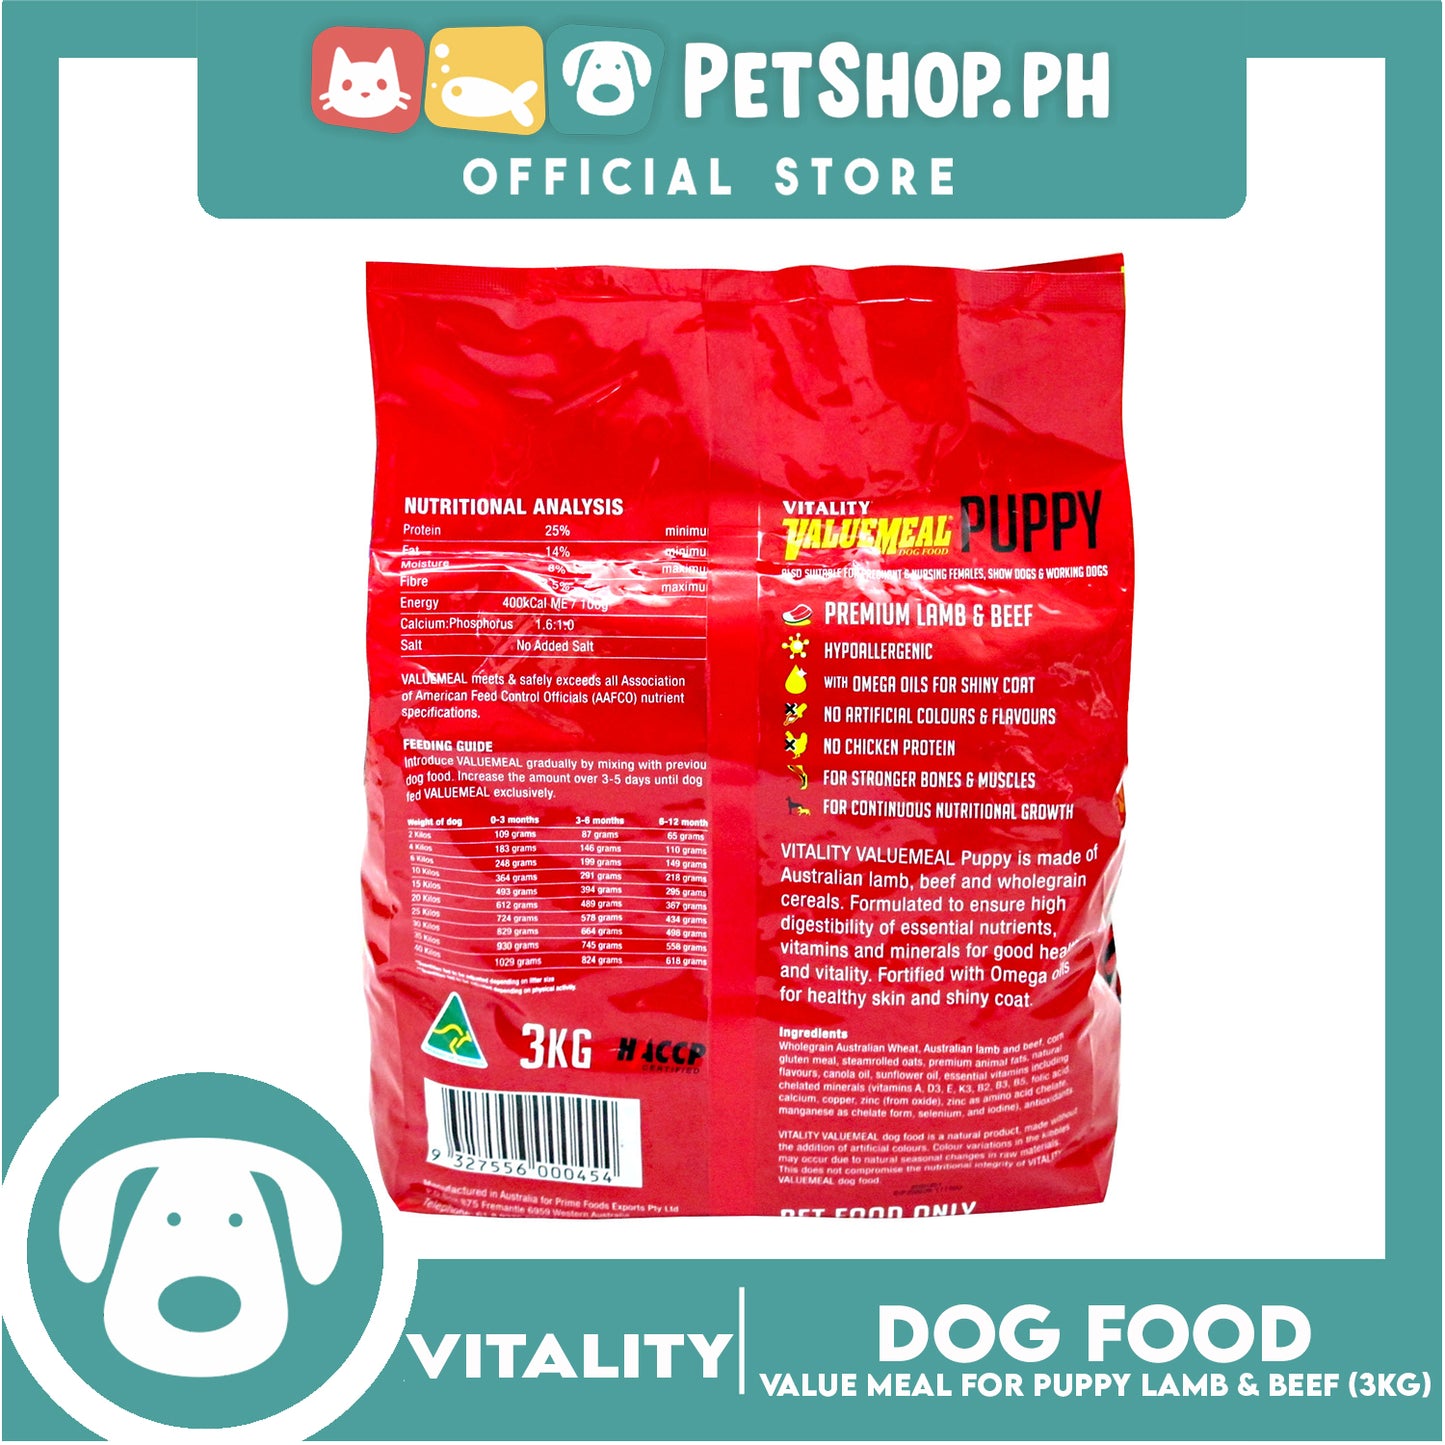 Vitality Valuemeal Puppy Small Bite, Premium Lamb And Beef Flavor, Puppy Food, Dry Dog Food